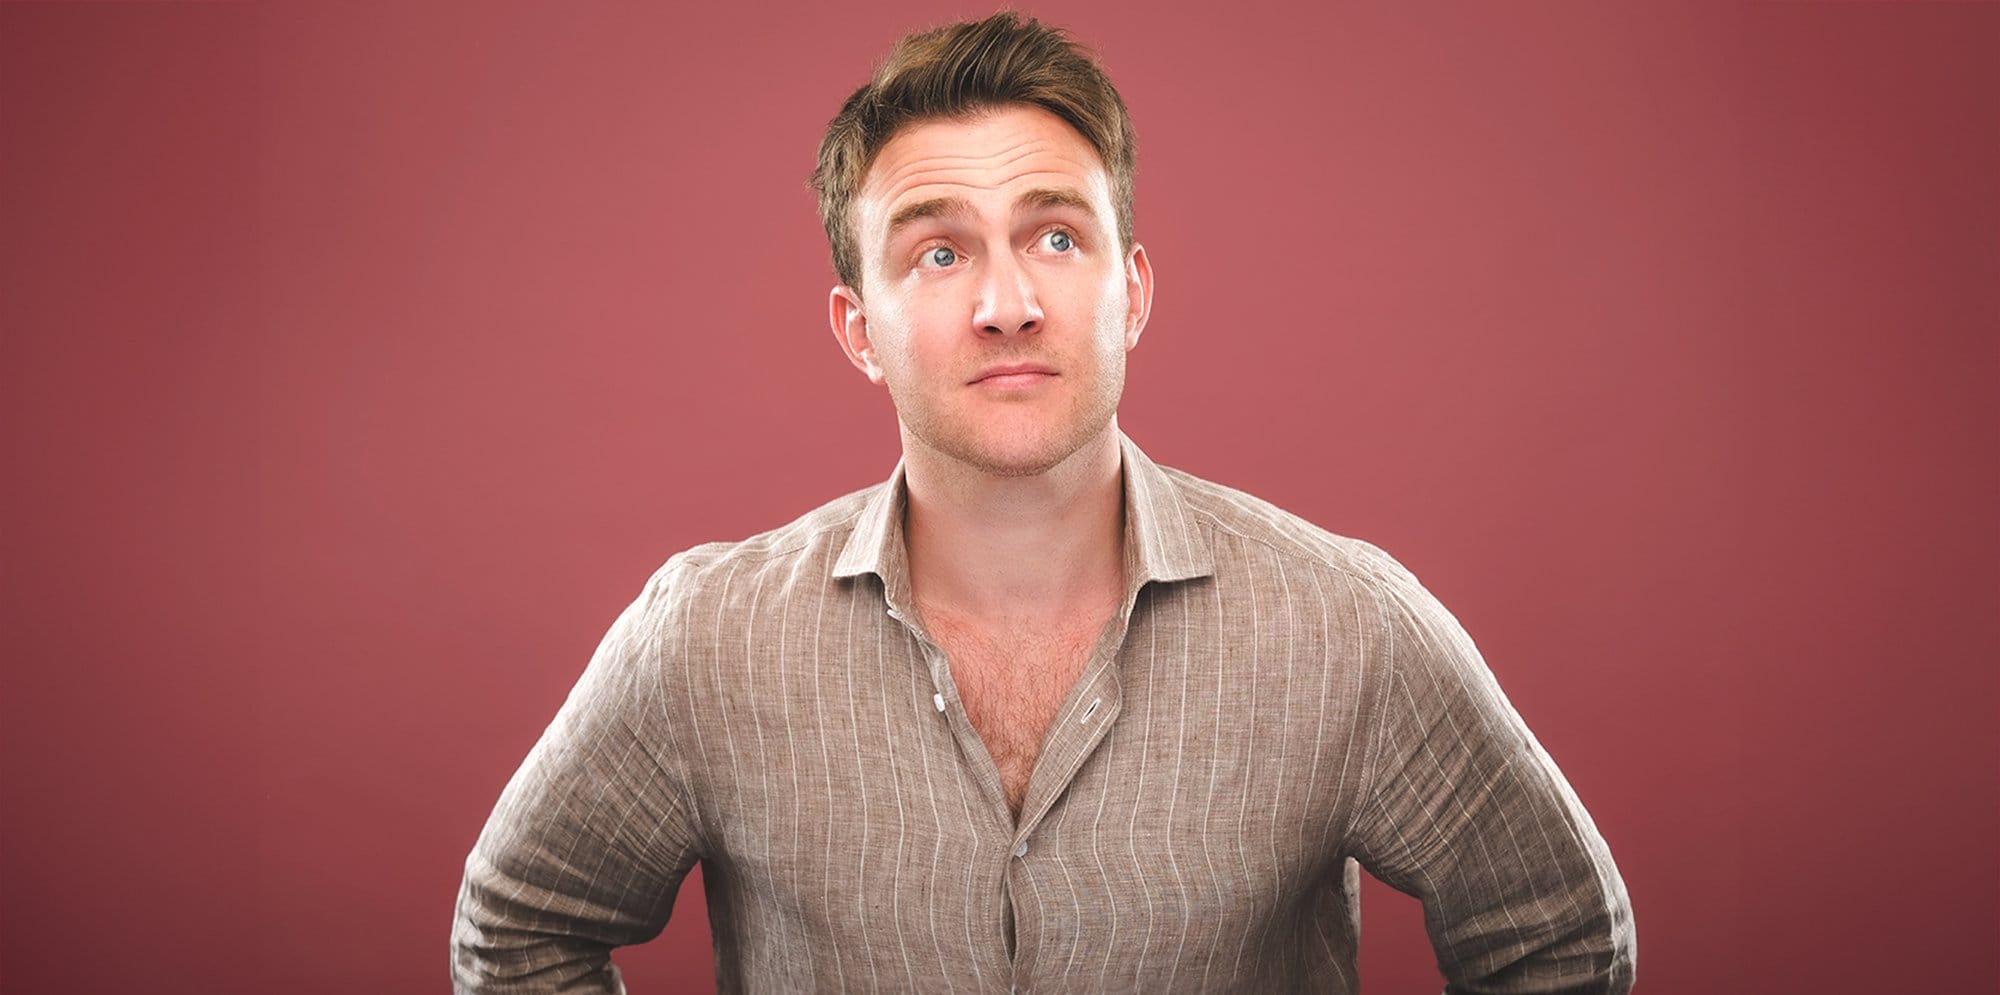 Tom Houghton, the comedian stands in a striped shirt on a light red background